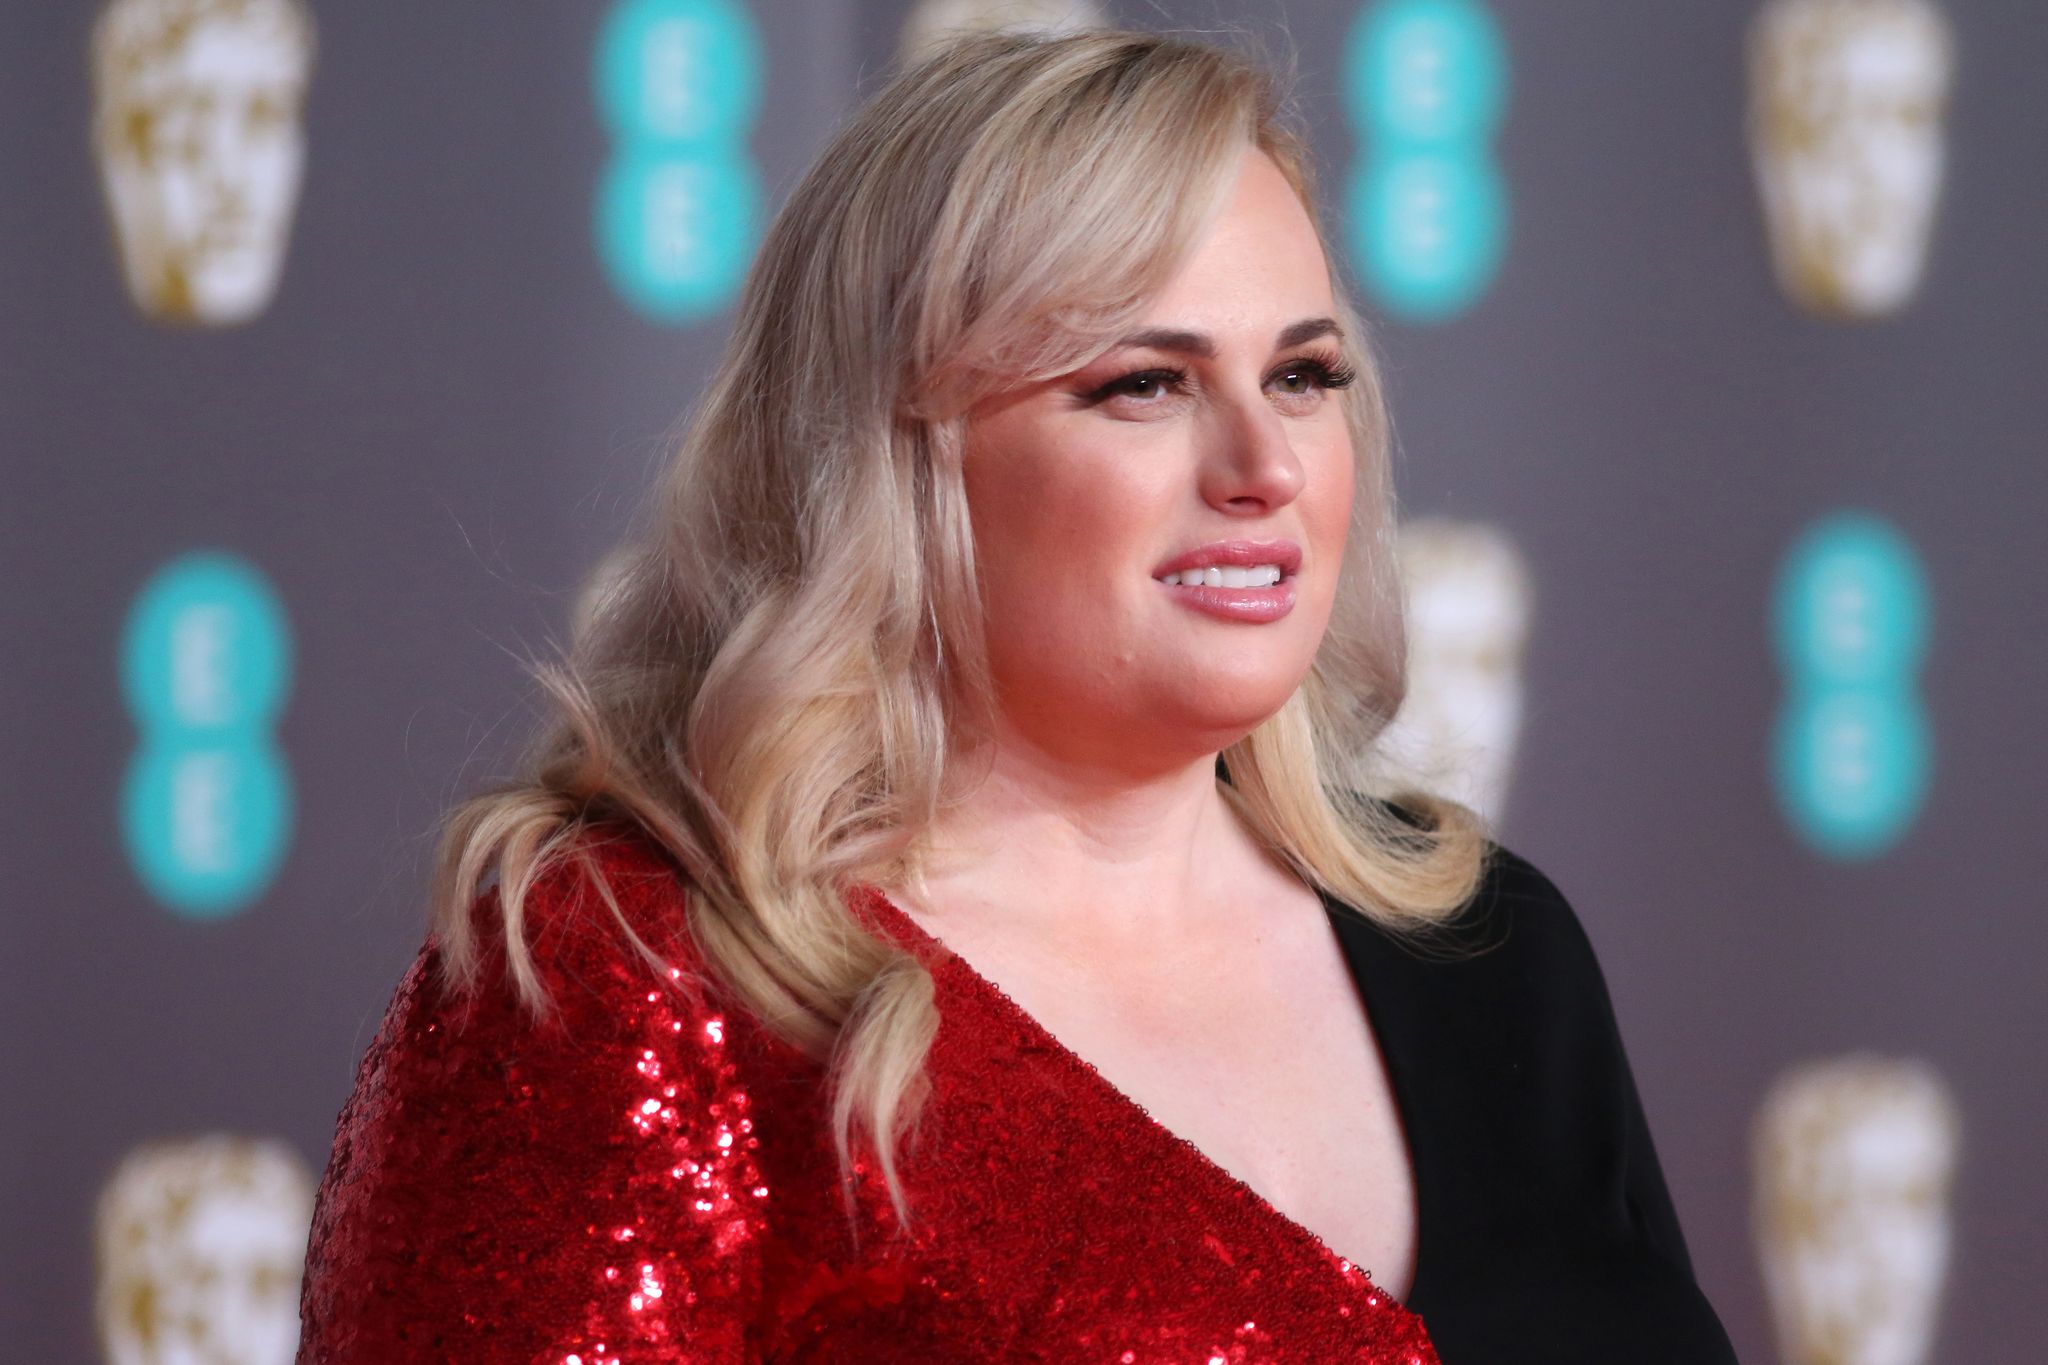 Rebel Wilson at the EE British Academy Film Awards 2020 at Royal Albert Hall on February 02, 2020 in London, England. | Photo: Getty Images